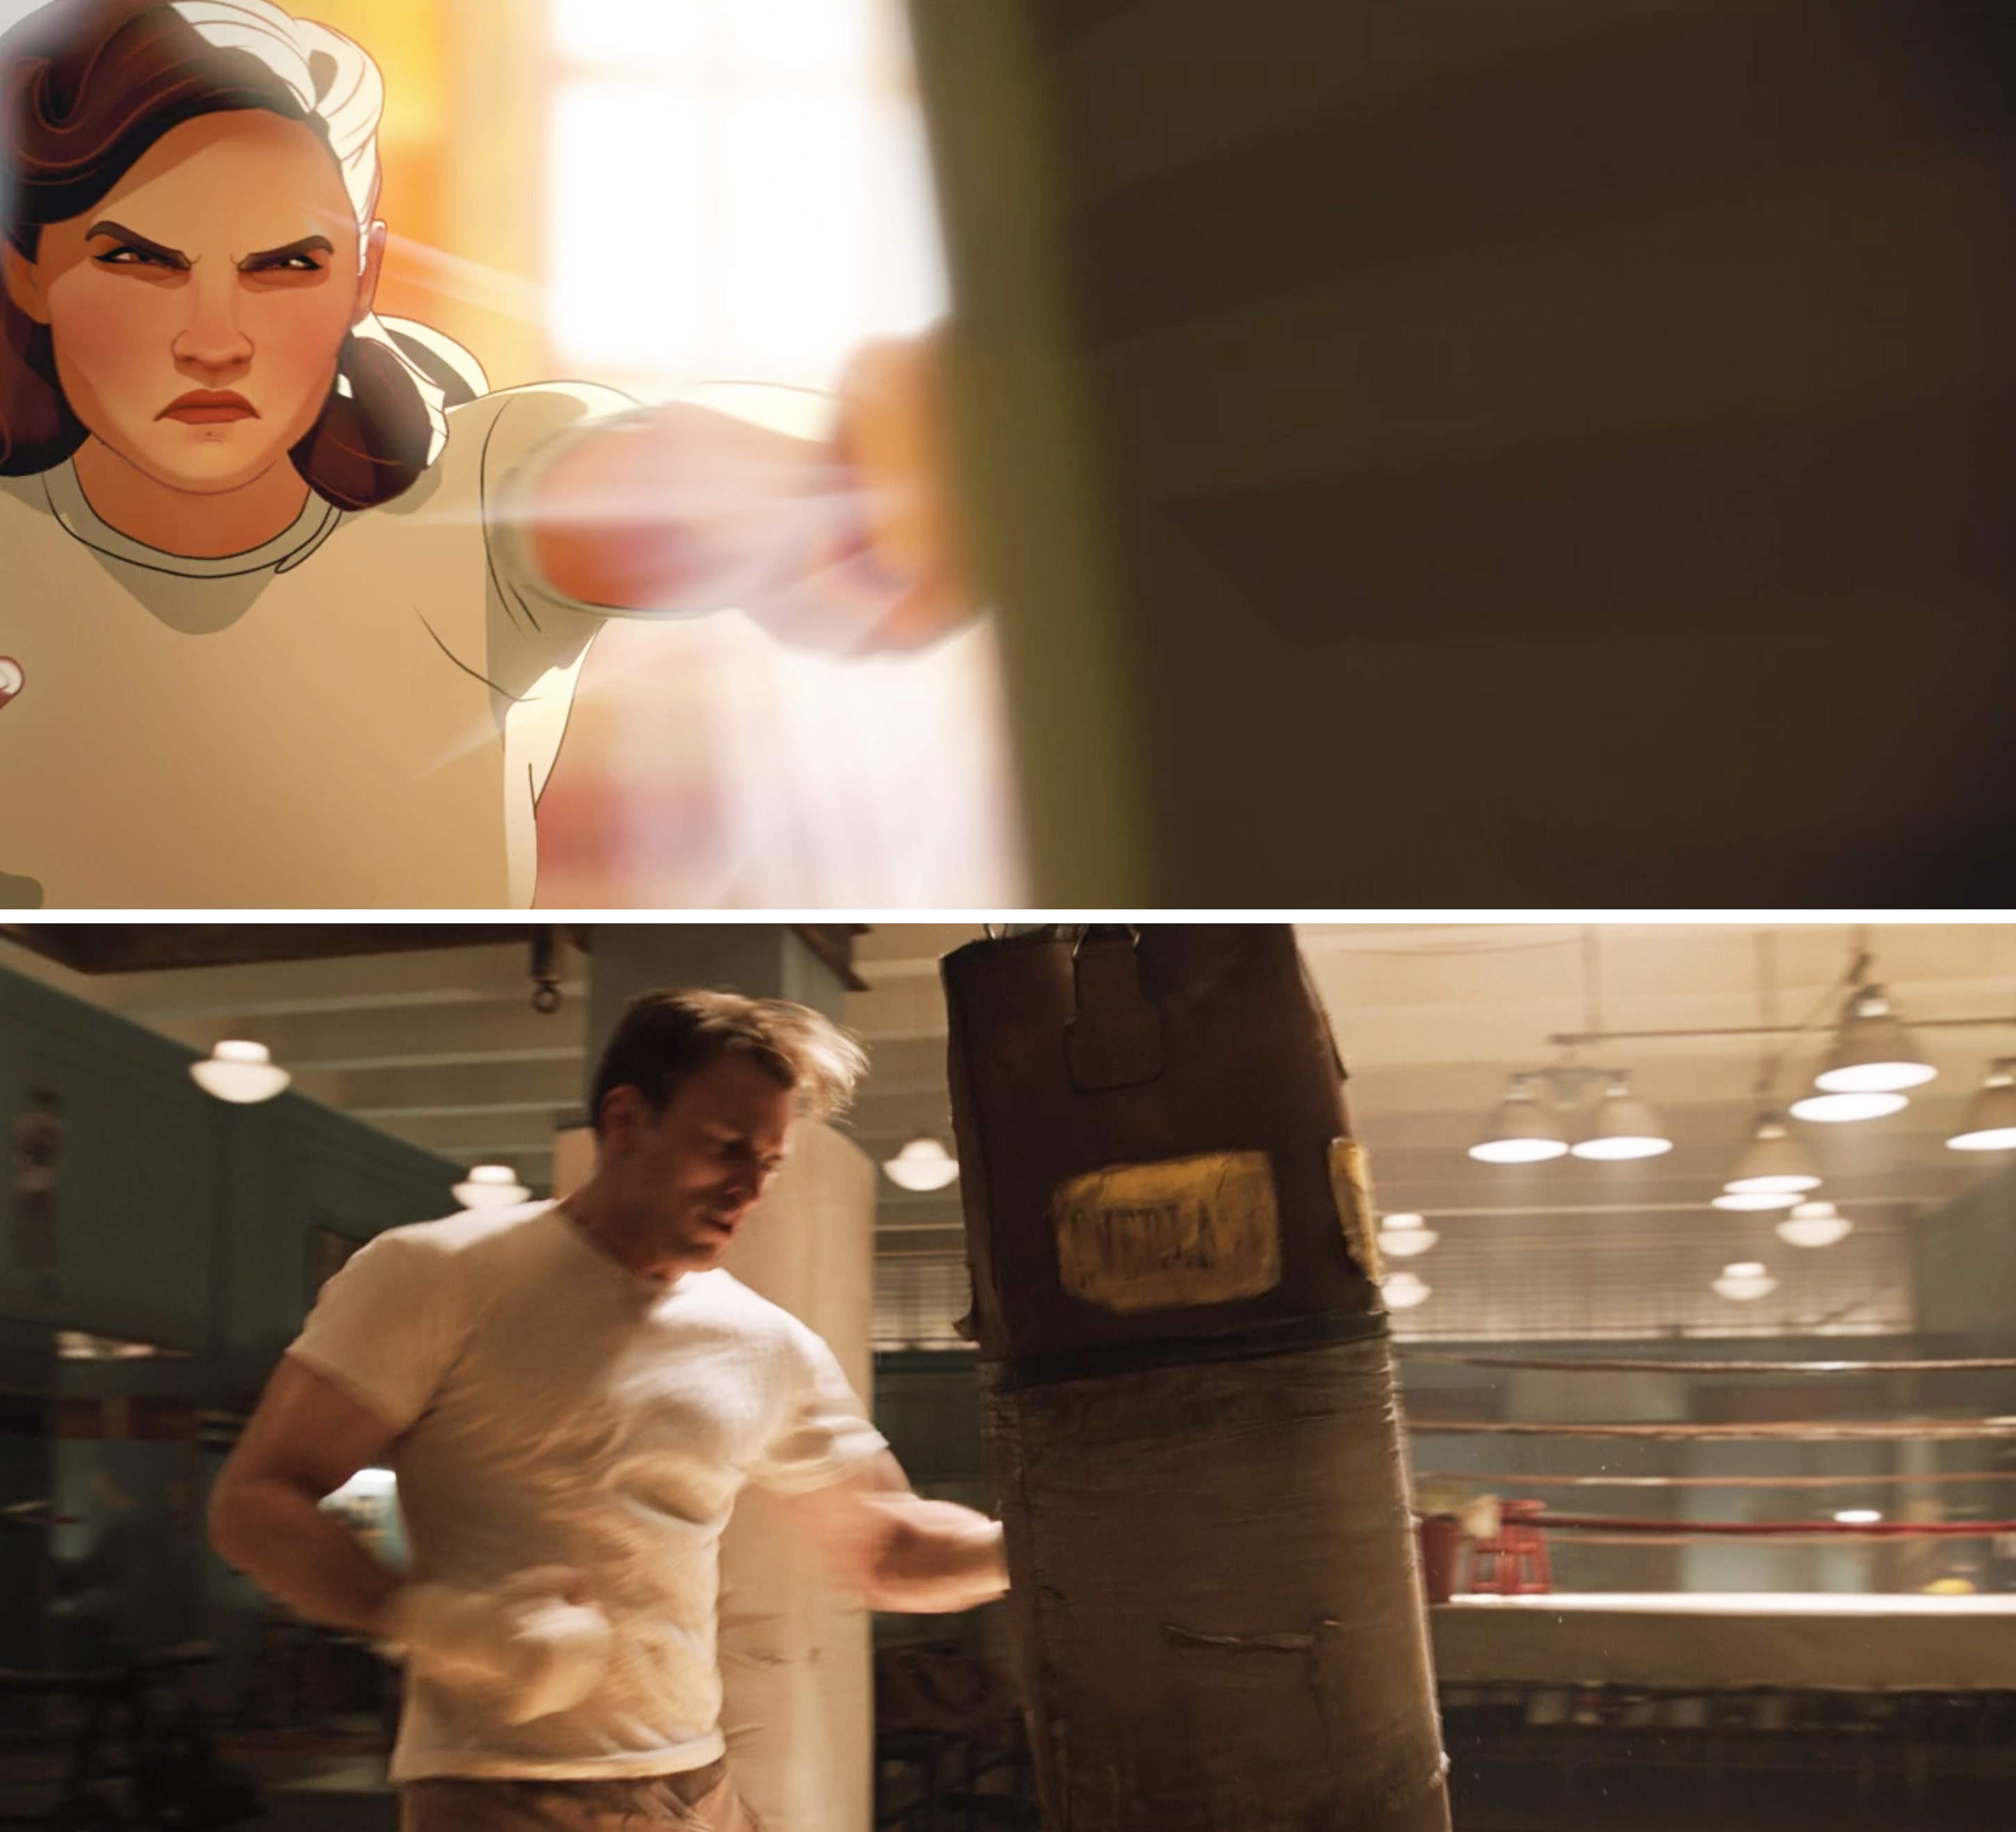 Peggy punching a bunching bag in a white shirt vs. Steve doing the same